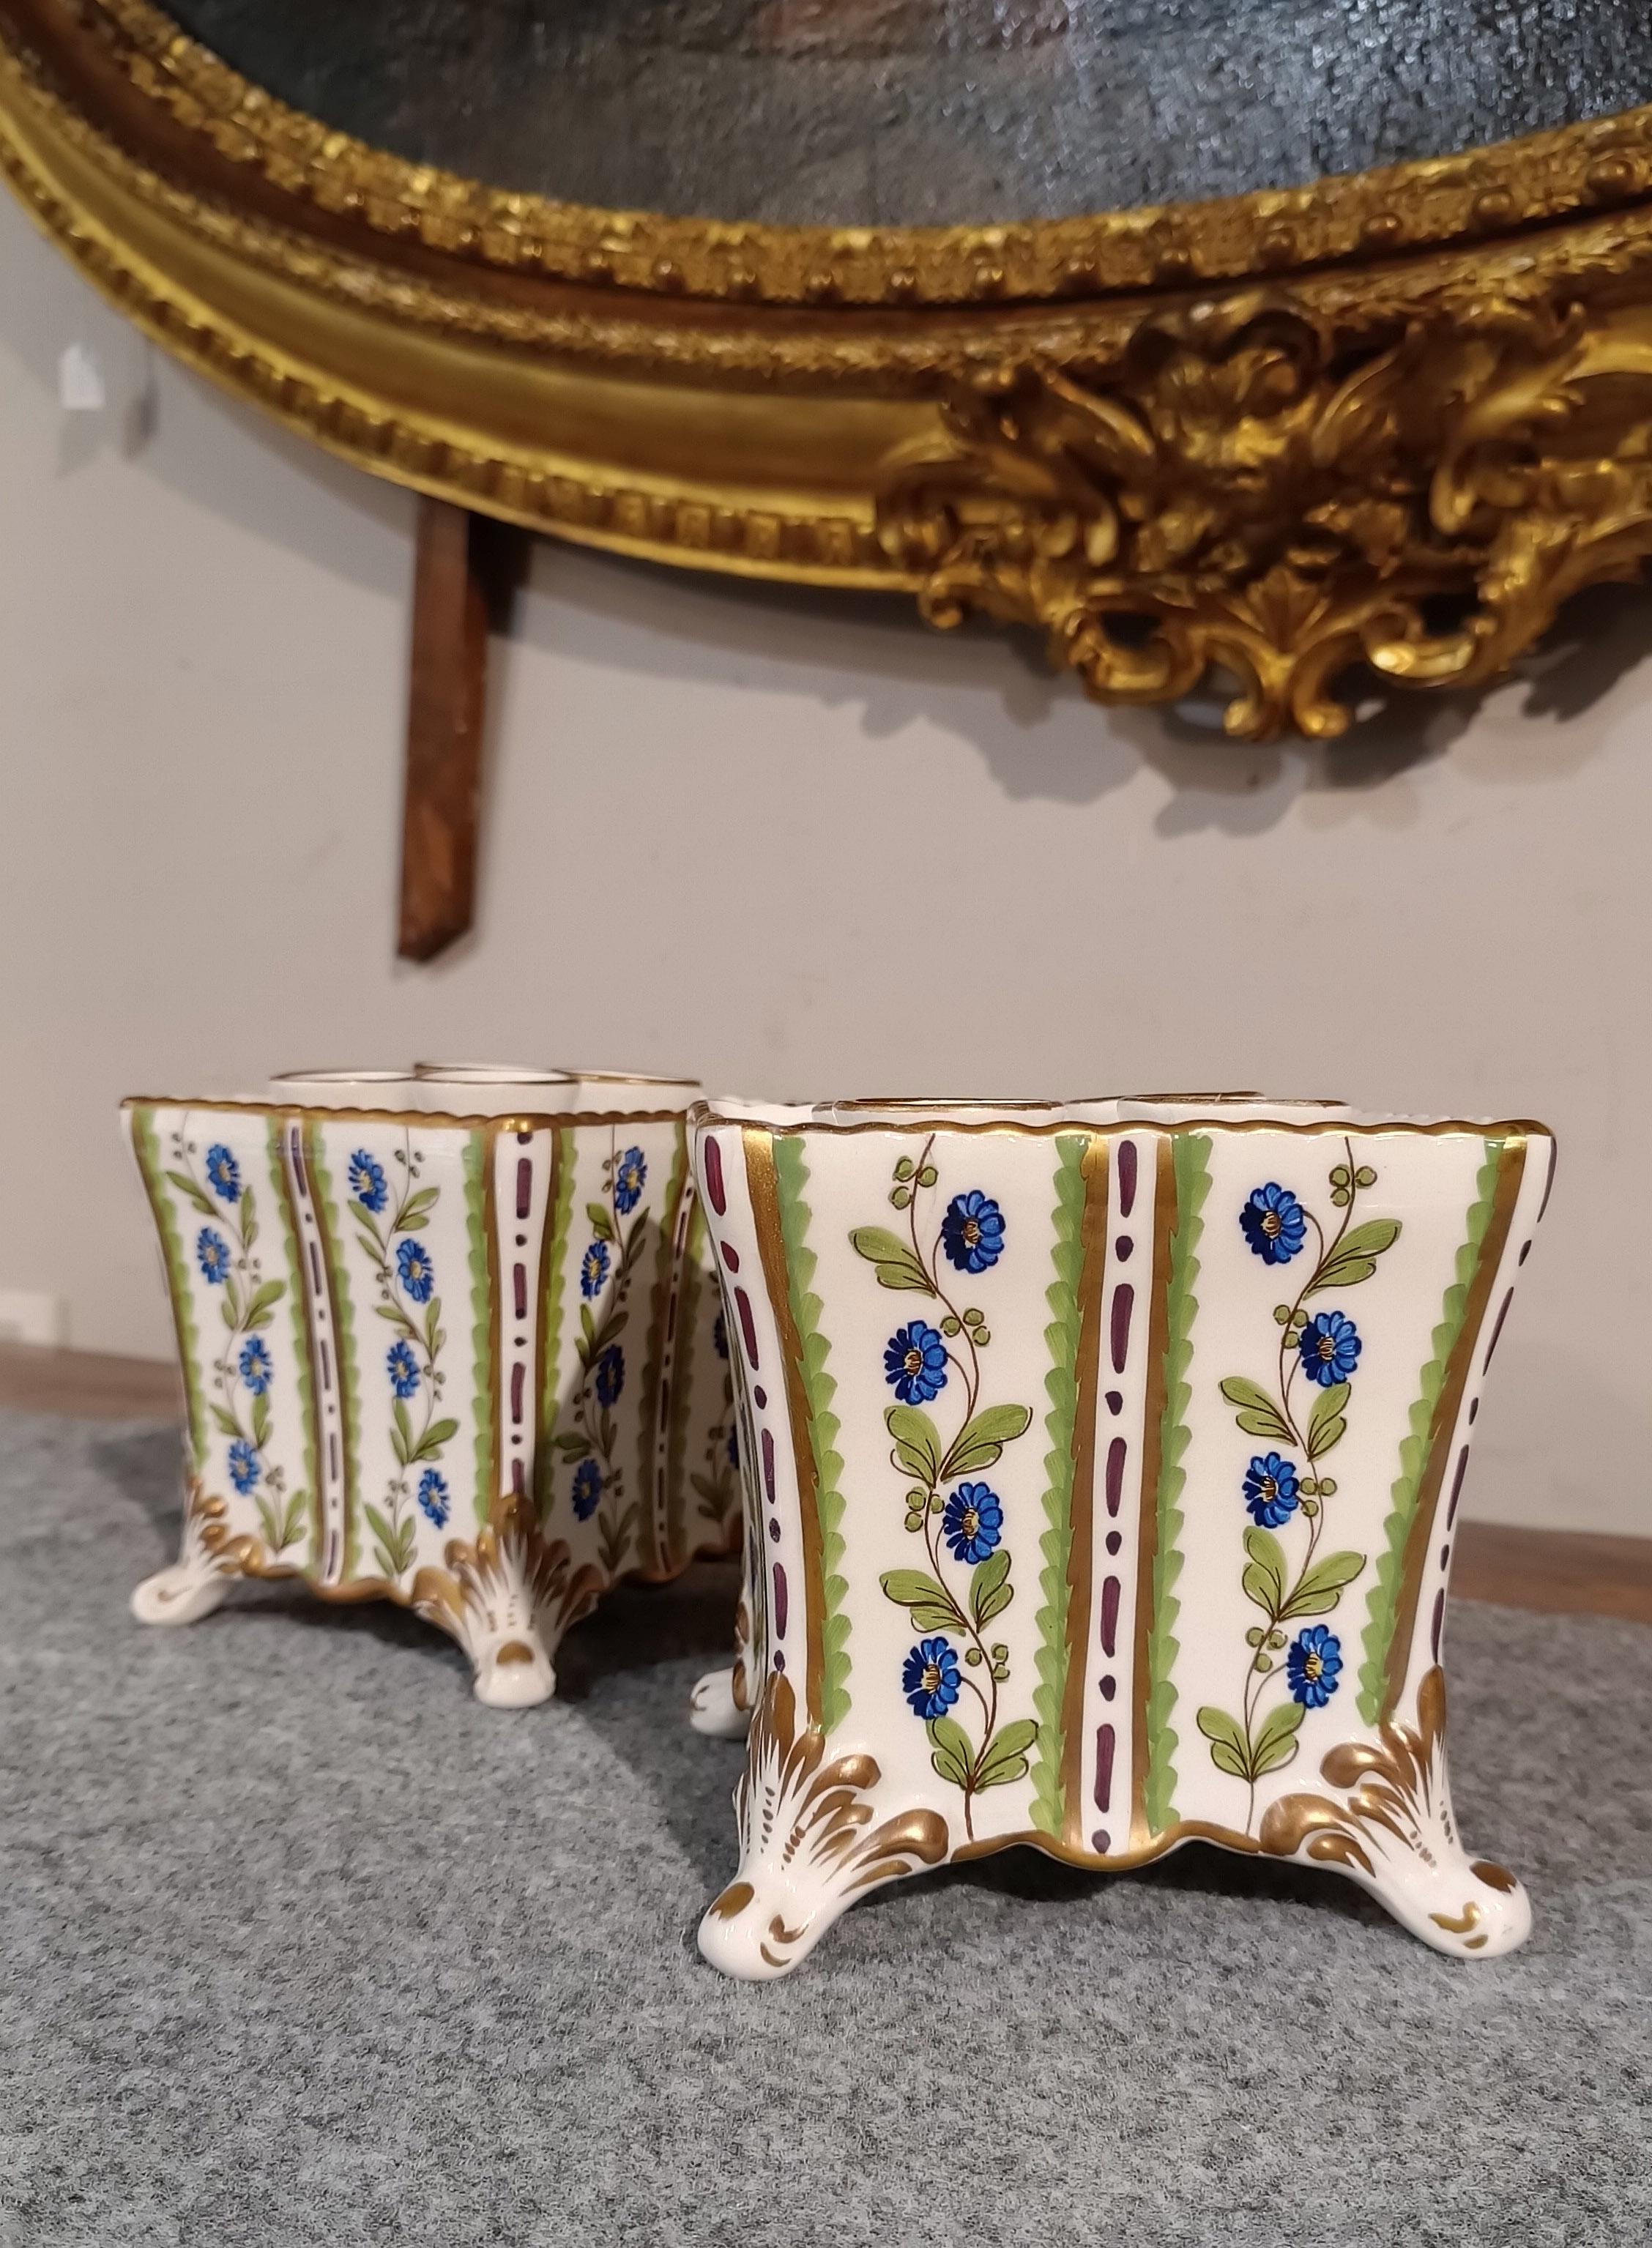 Italian PAIR OF EARLY 19th CENTURY POLYCHROME PORCELAIN FLOWER VASE For Sale